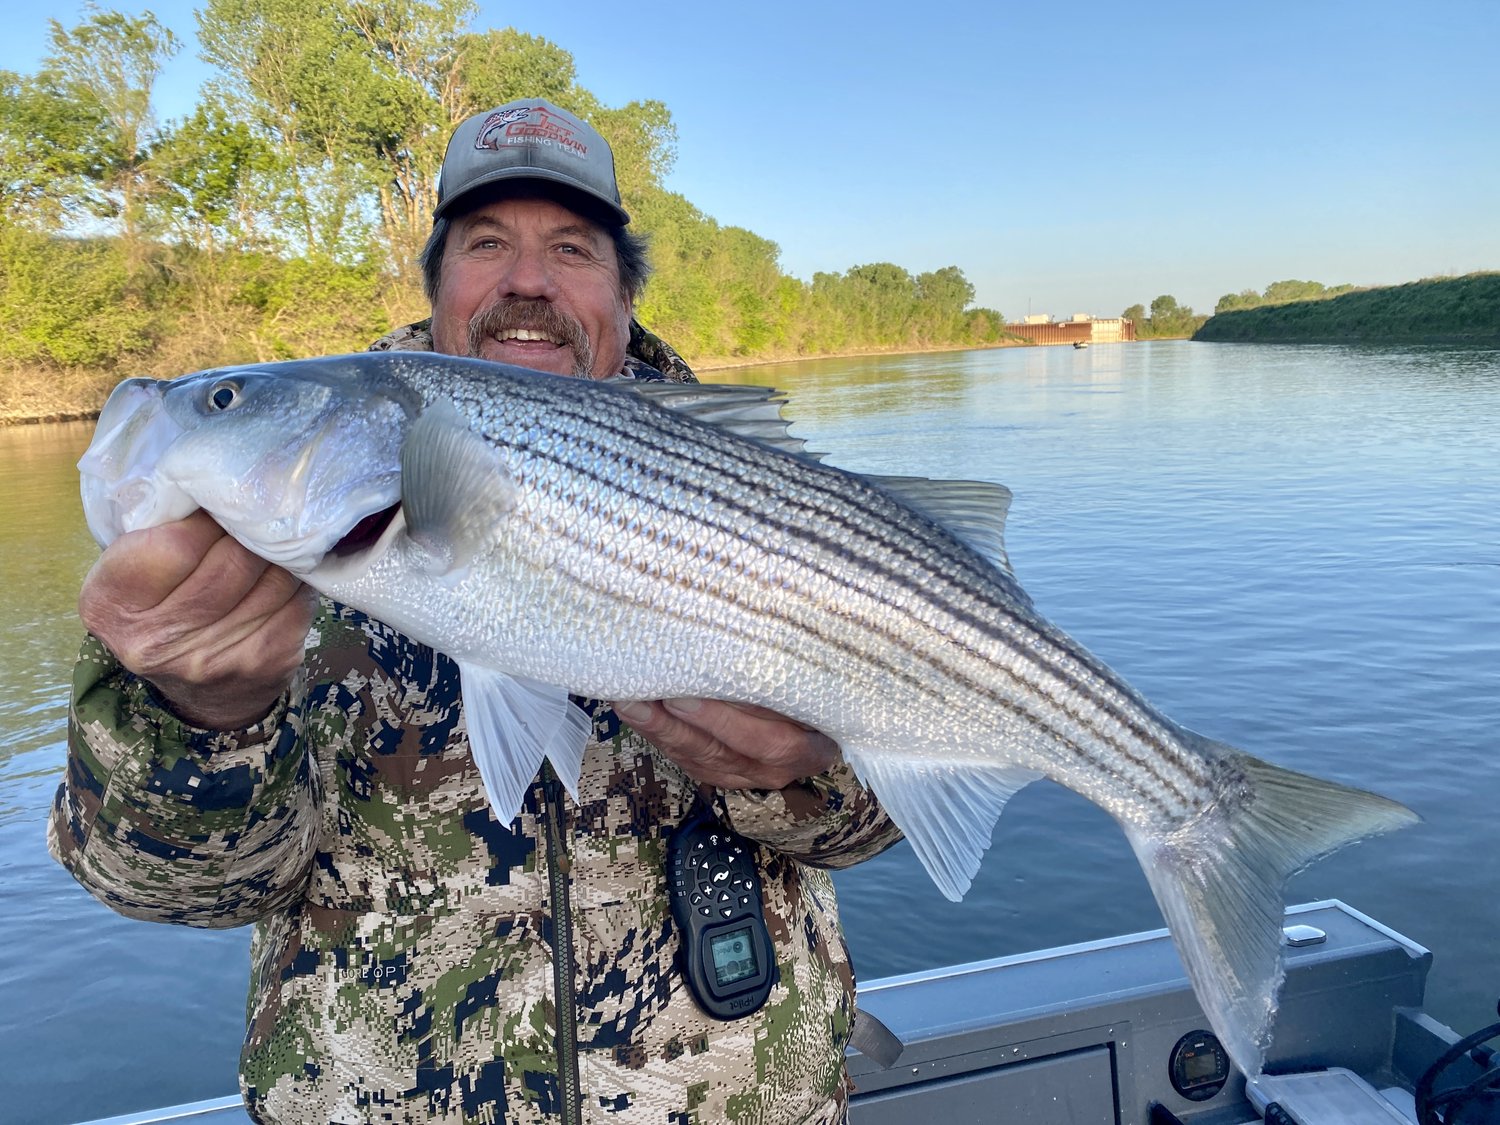 Ultimate Guide to Striped Bass Fishing Where to Find Them, How to